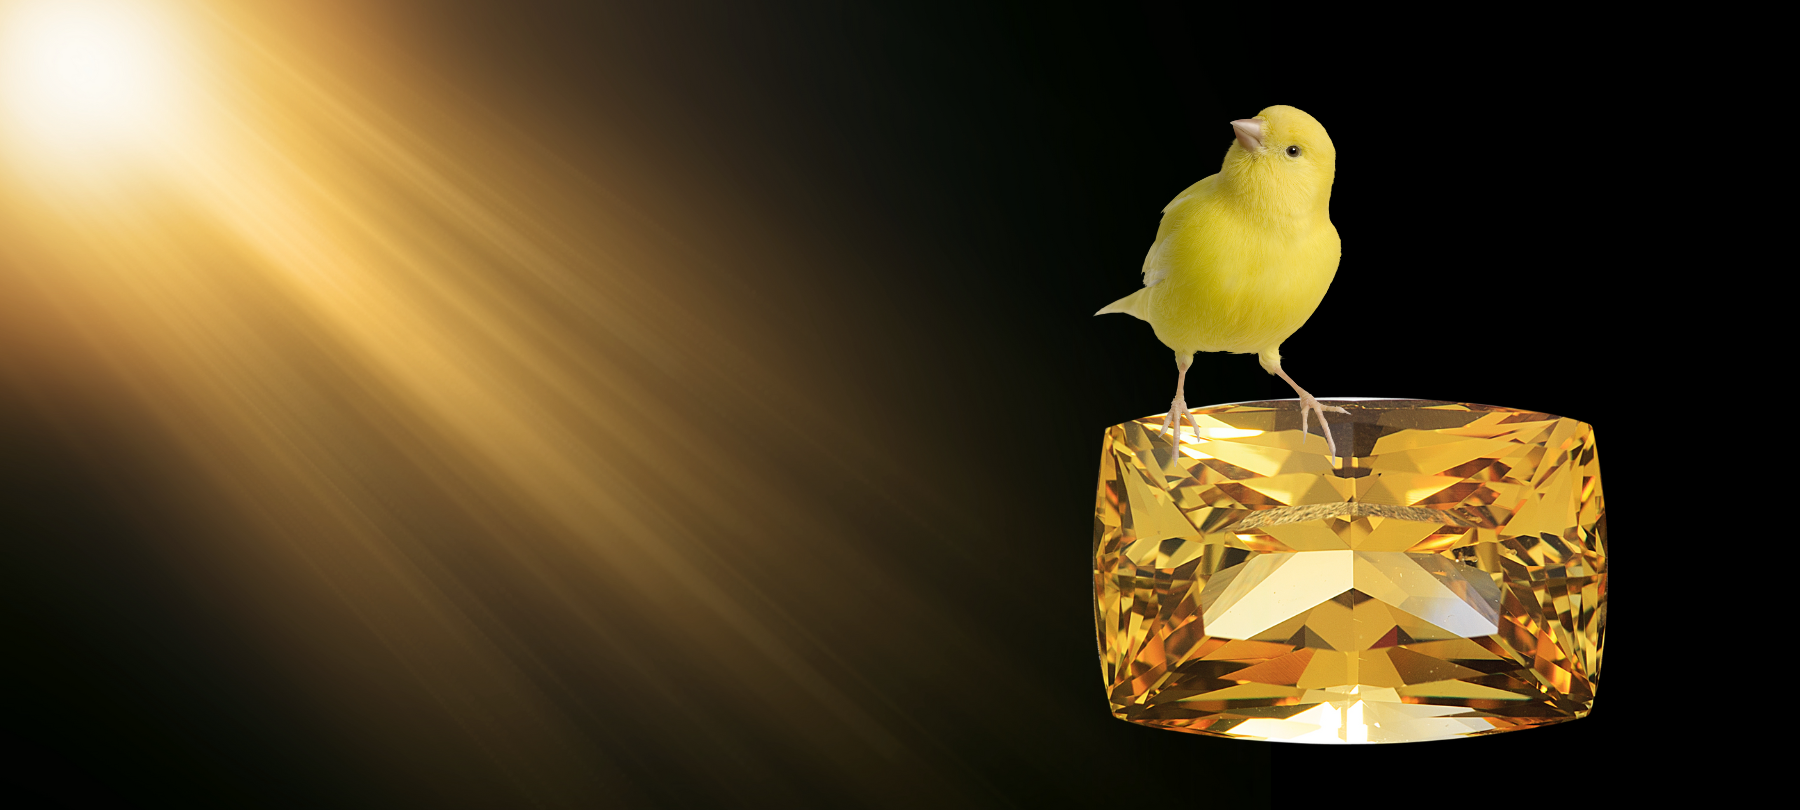 Yellow Danburite faceted unmounted gem with a canary perched on it